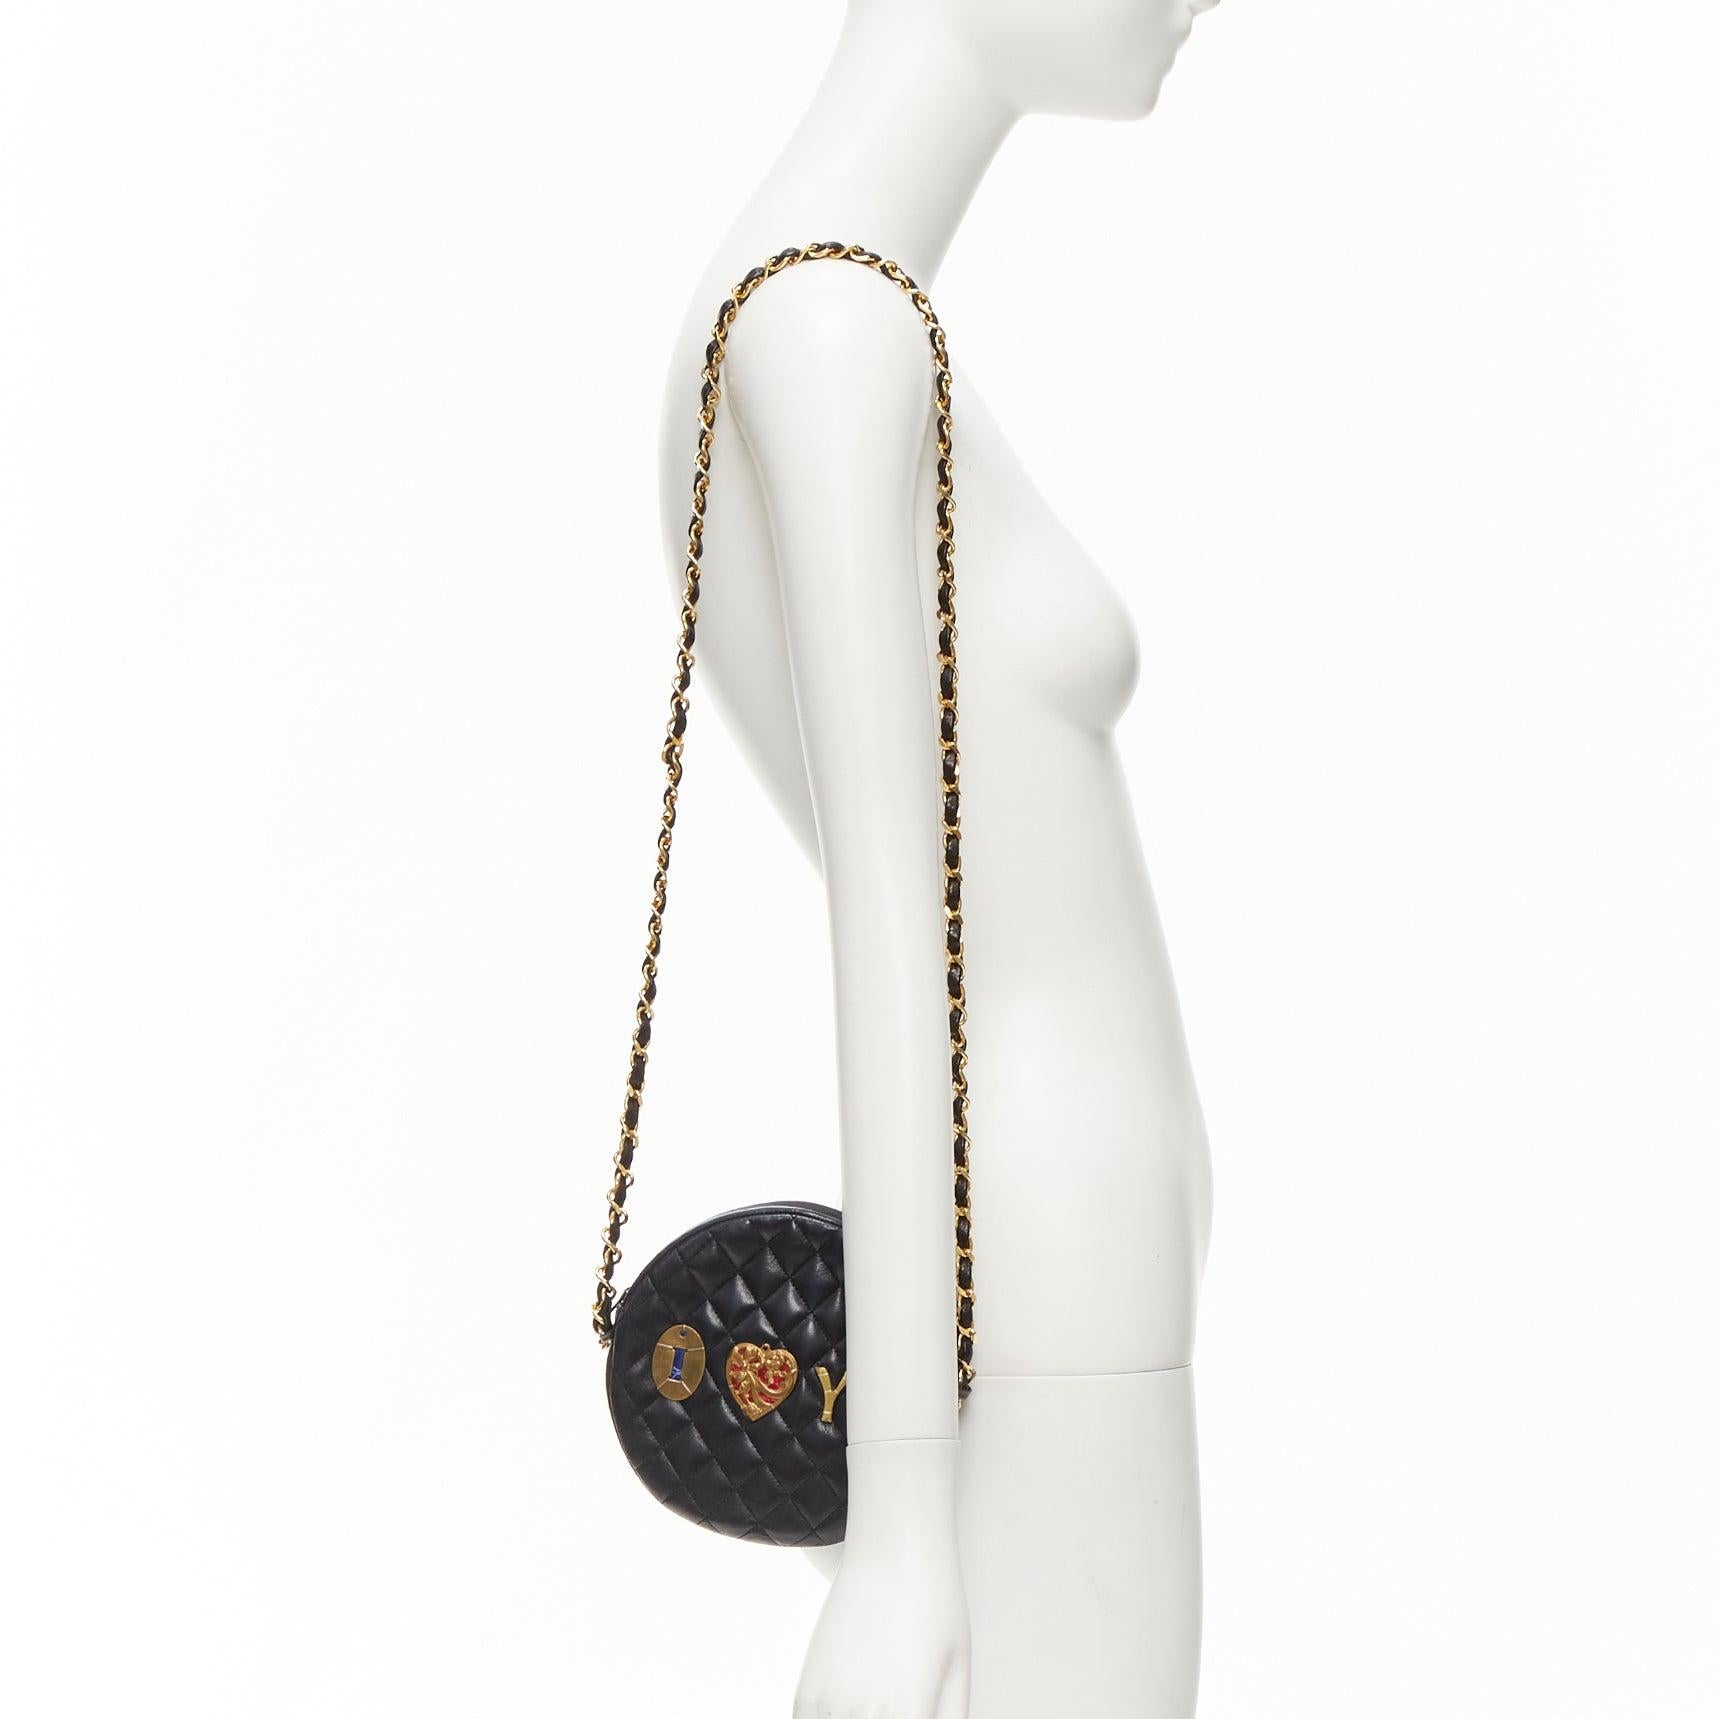 TIGER IN THE RAIN CHANEL Vintage I Love You Crossbody Kette Tasche mit runder Applikation
Referenz: NILI/A00052
Marke: Tiger In The Rain
Collection'S: CHANEL
MATERIAL: Leder, Metall
Farbe: Schwarz, Gold
Muster: Solide
Verschluss: